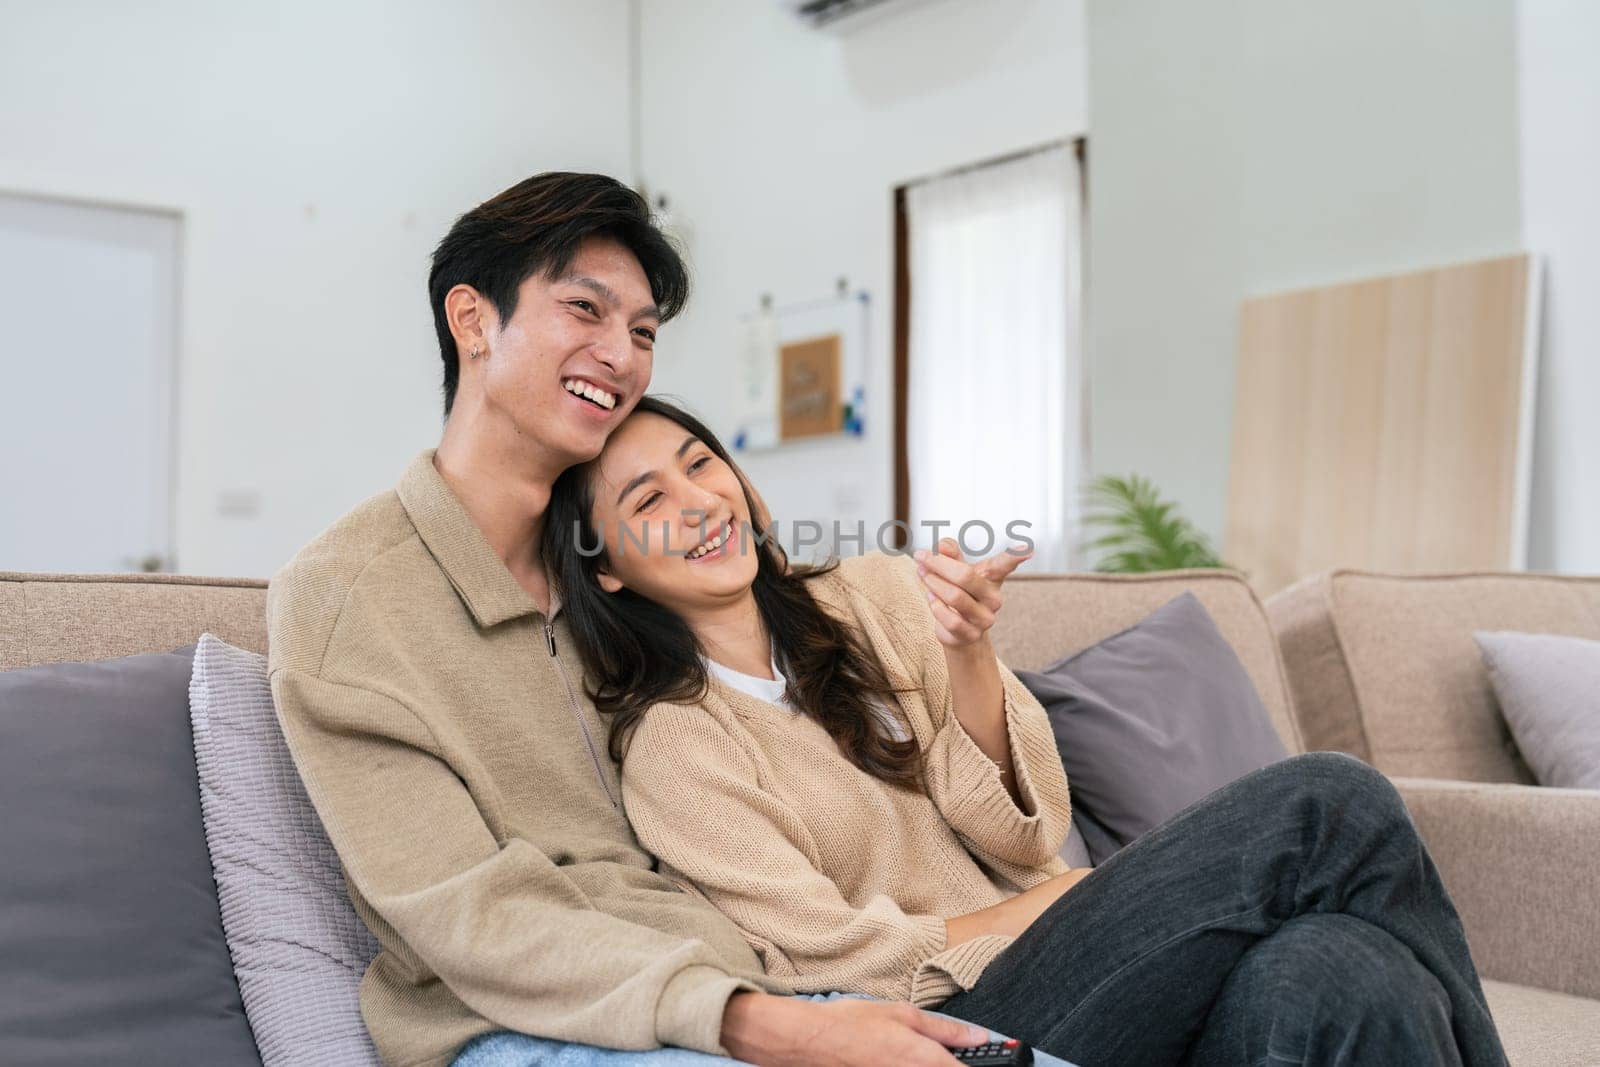 Couple Watches TV together while Sitting on a Couch in the Living Room. Girlfriend and Boyfriend embrace, cuddle, talk, smile and watch Television Streaming Services by itchaznong